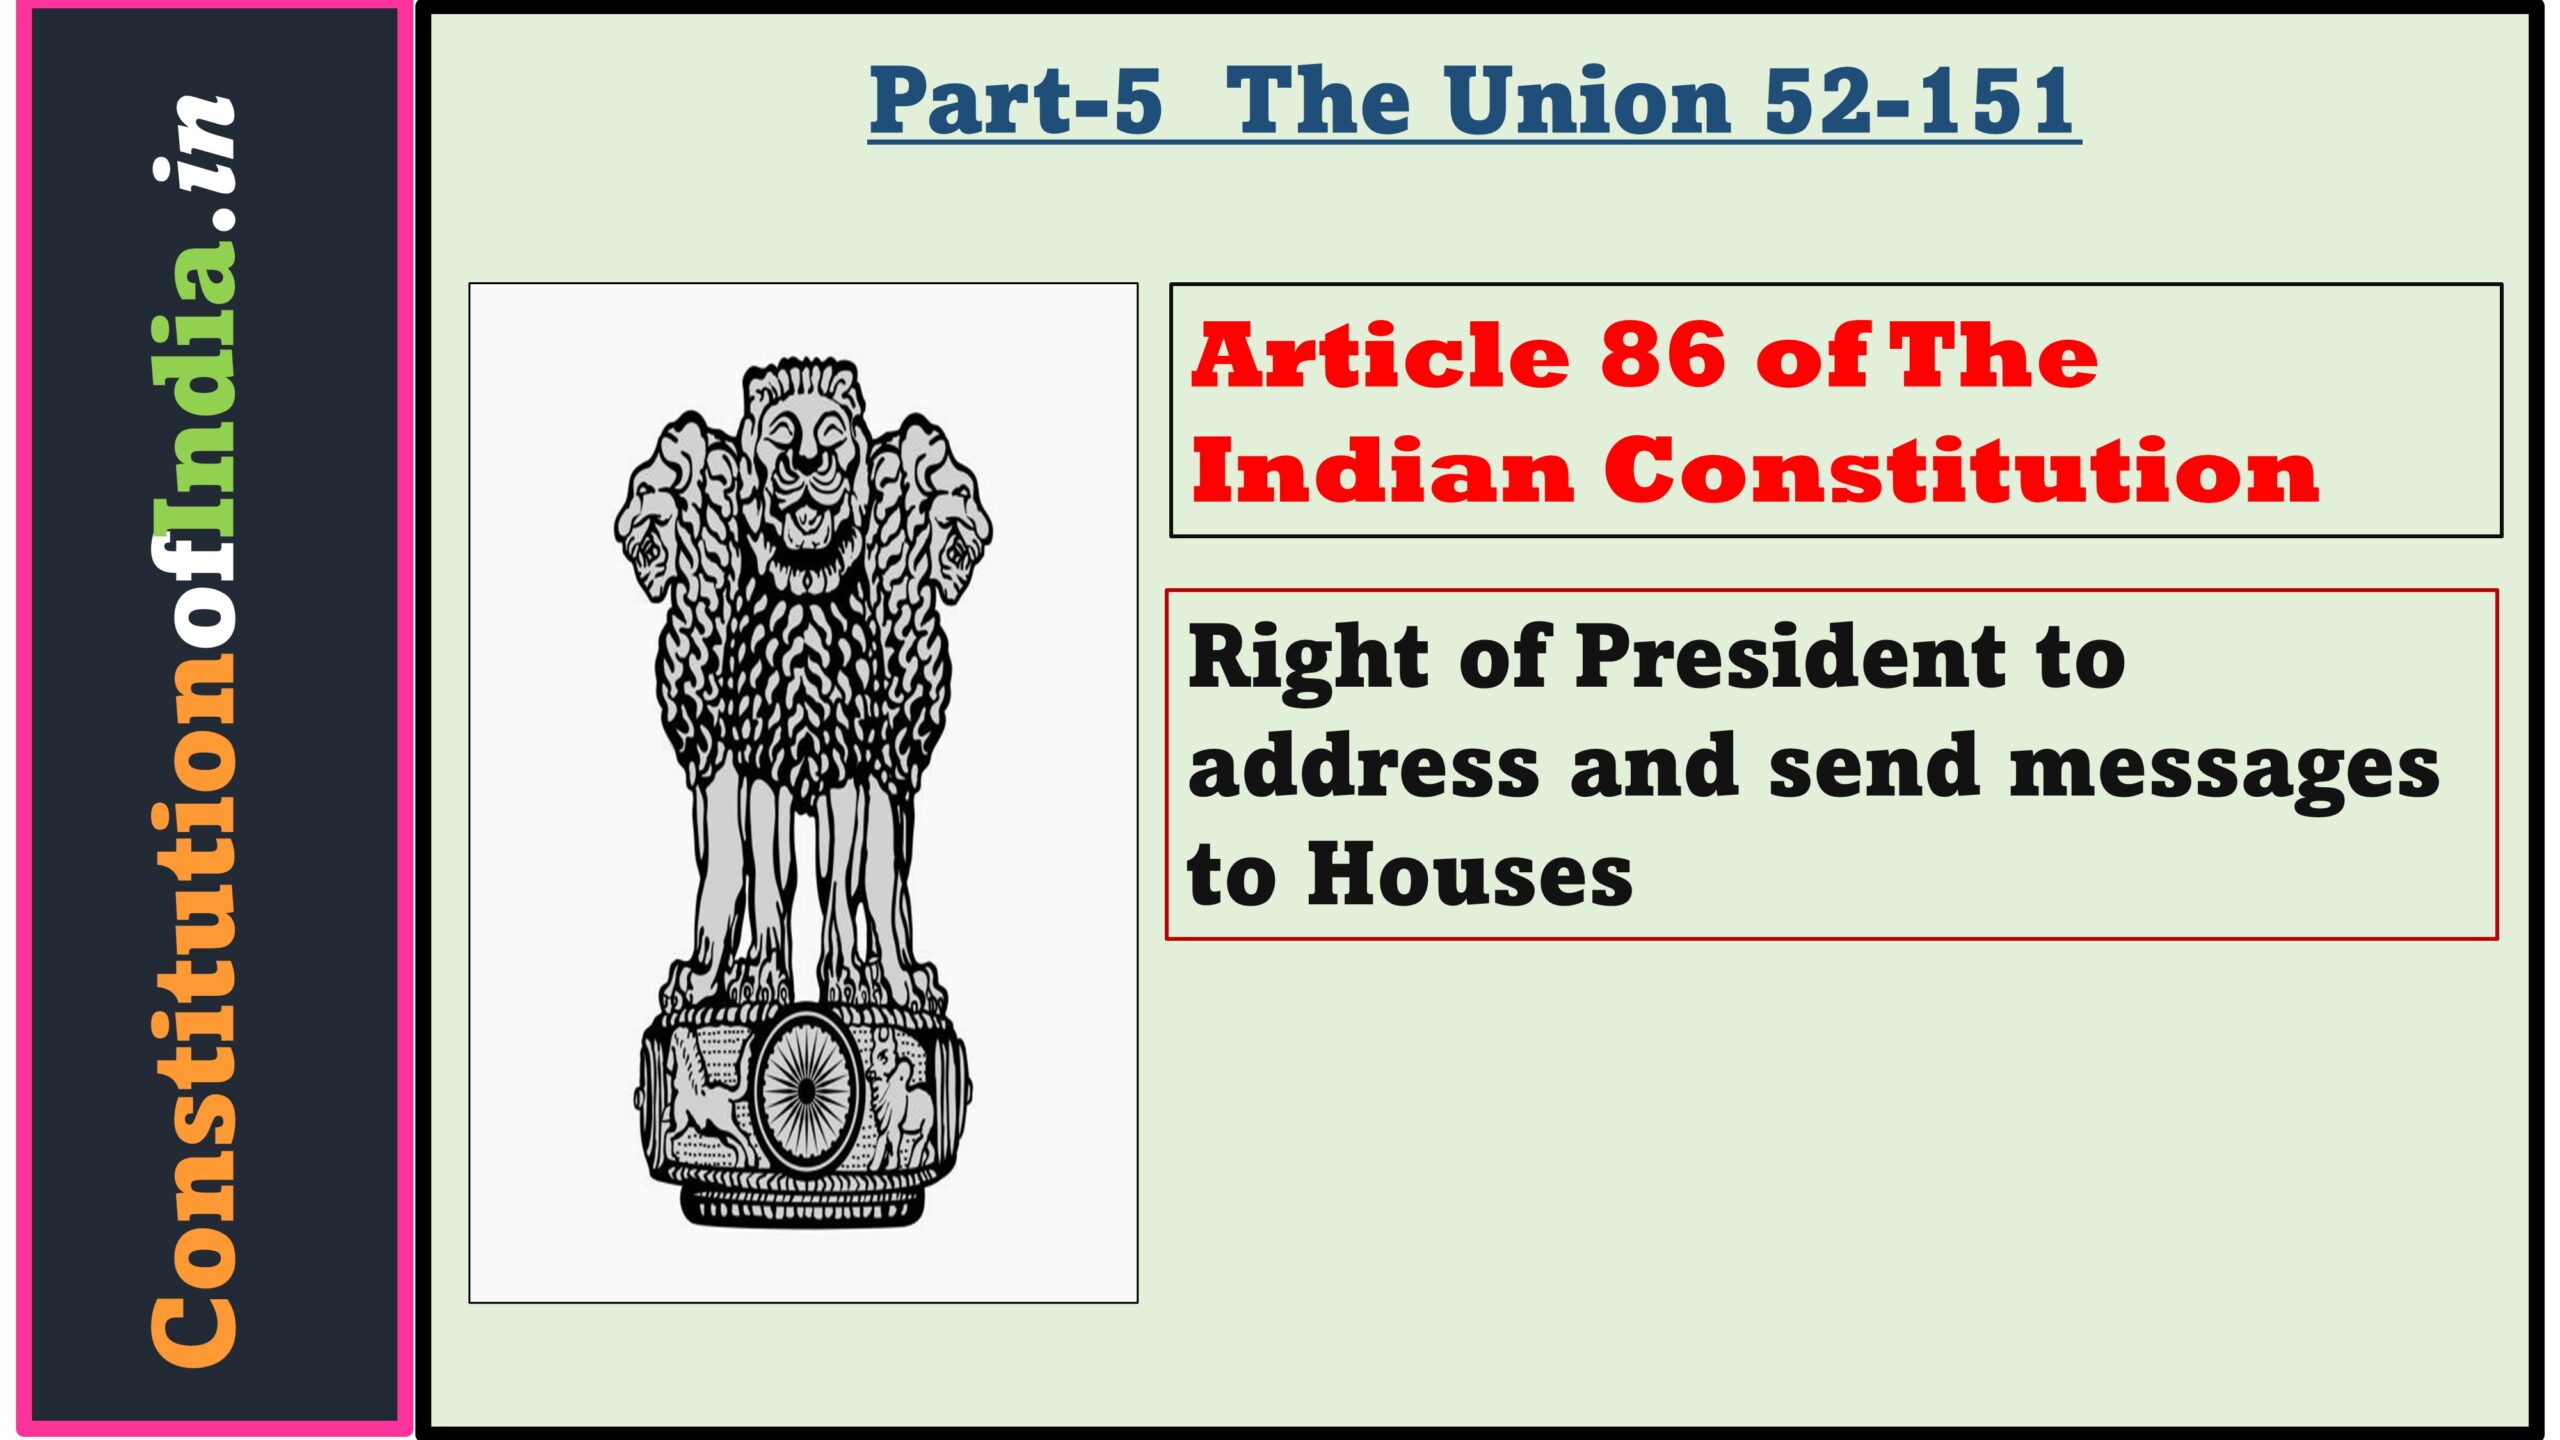 Article 86 of The Indian Constitution